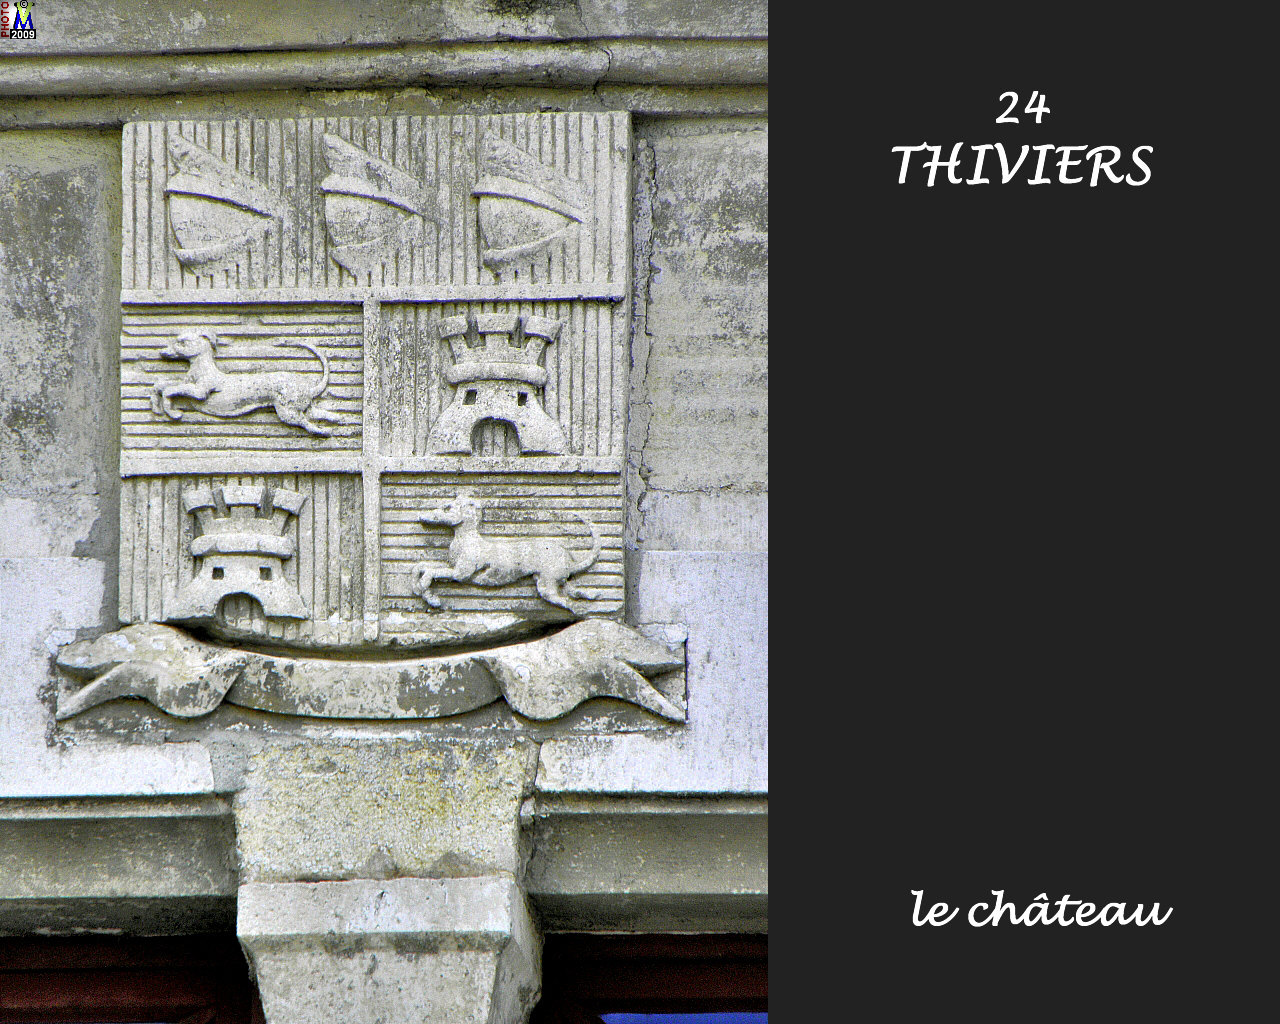 24THIVIERS_chateau_130.jpg